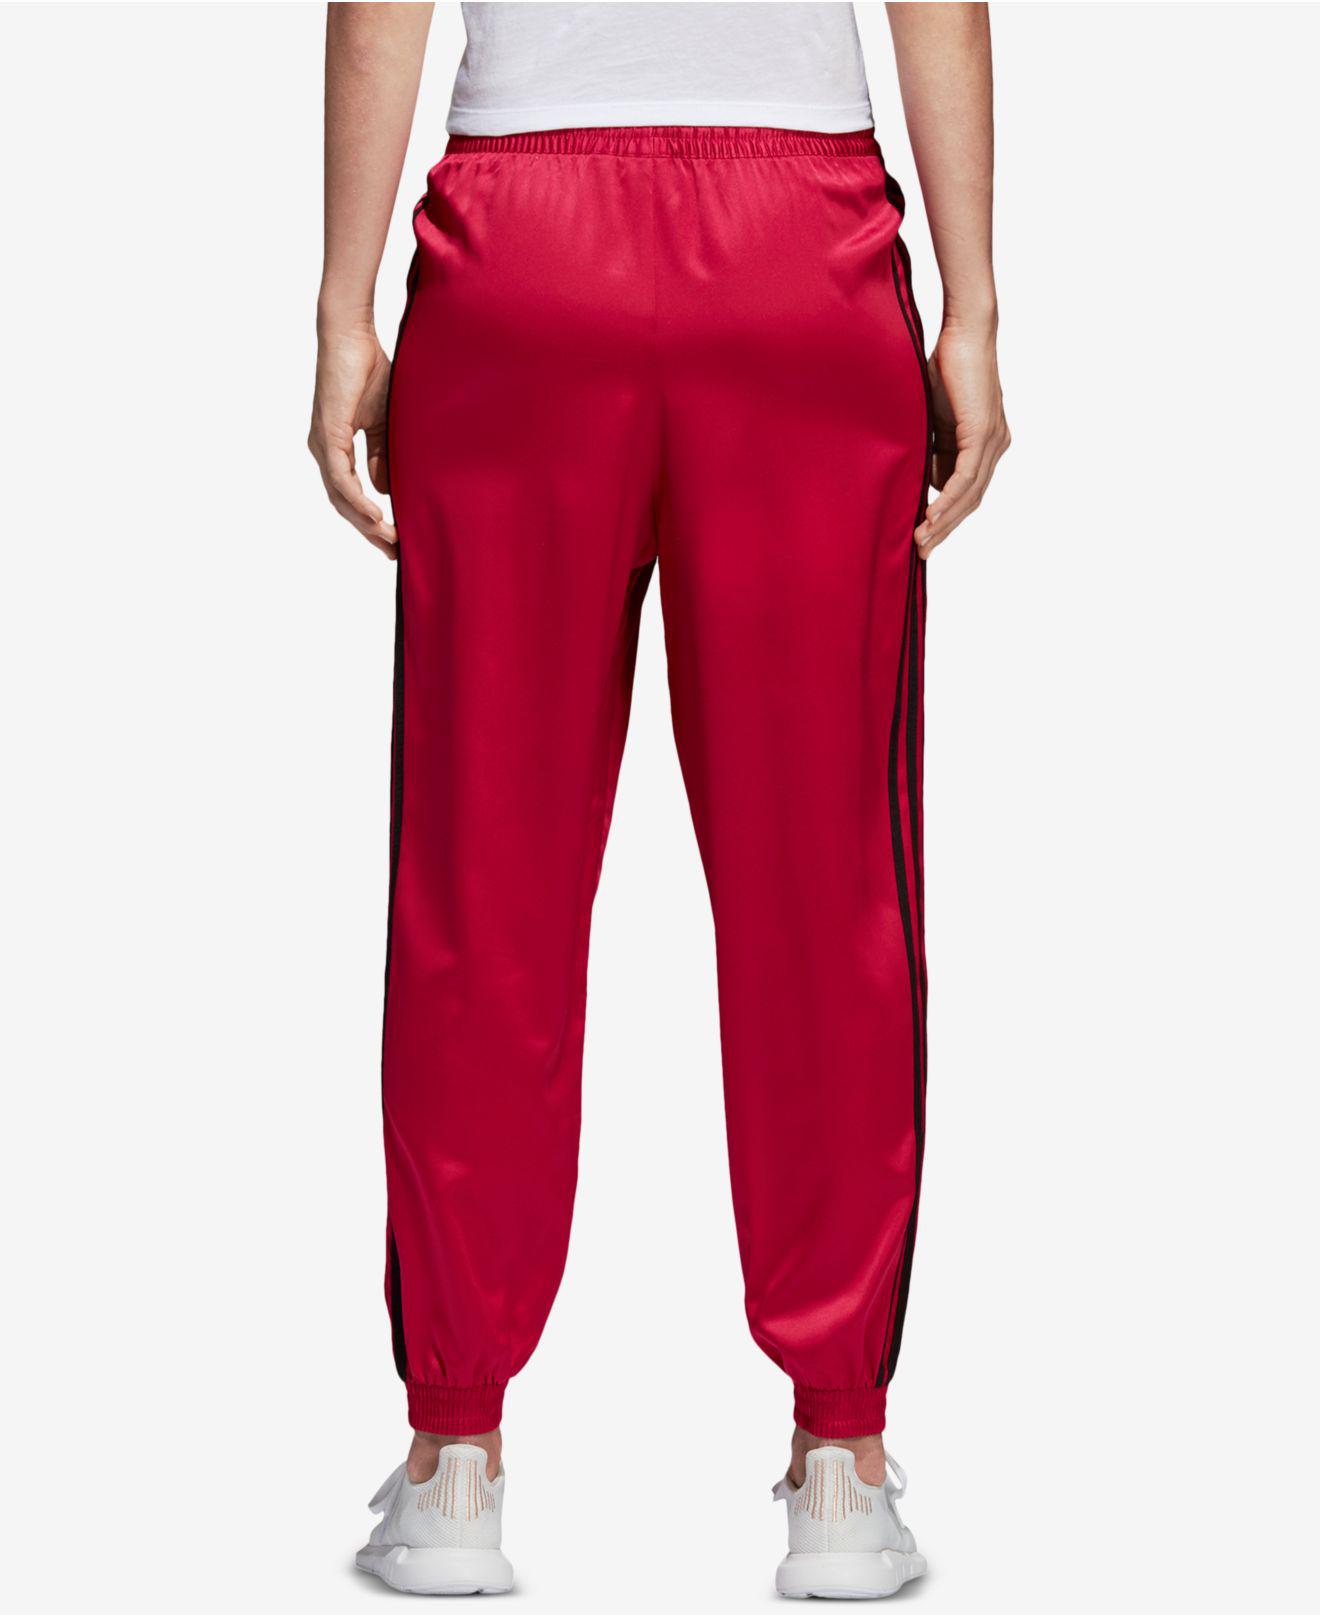 adidas Originals Satin Track Pants in Red - Lyst